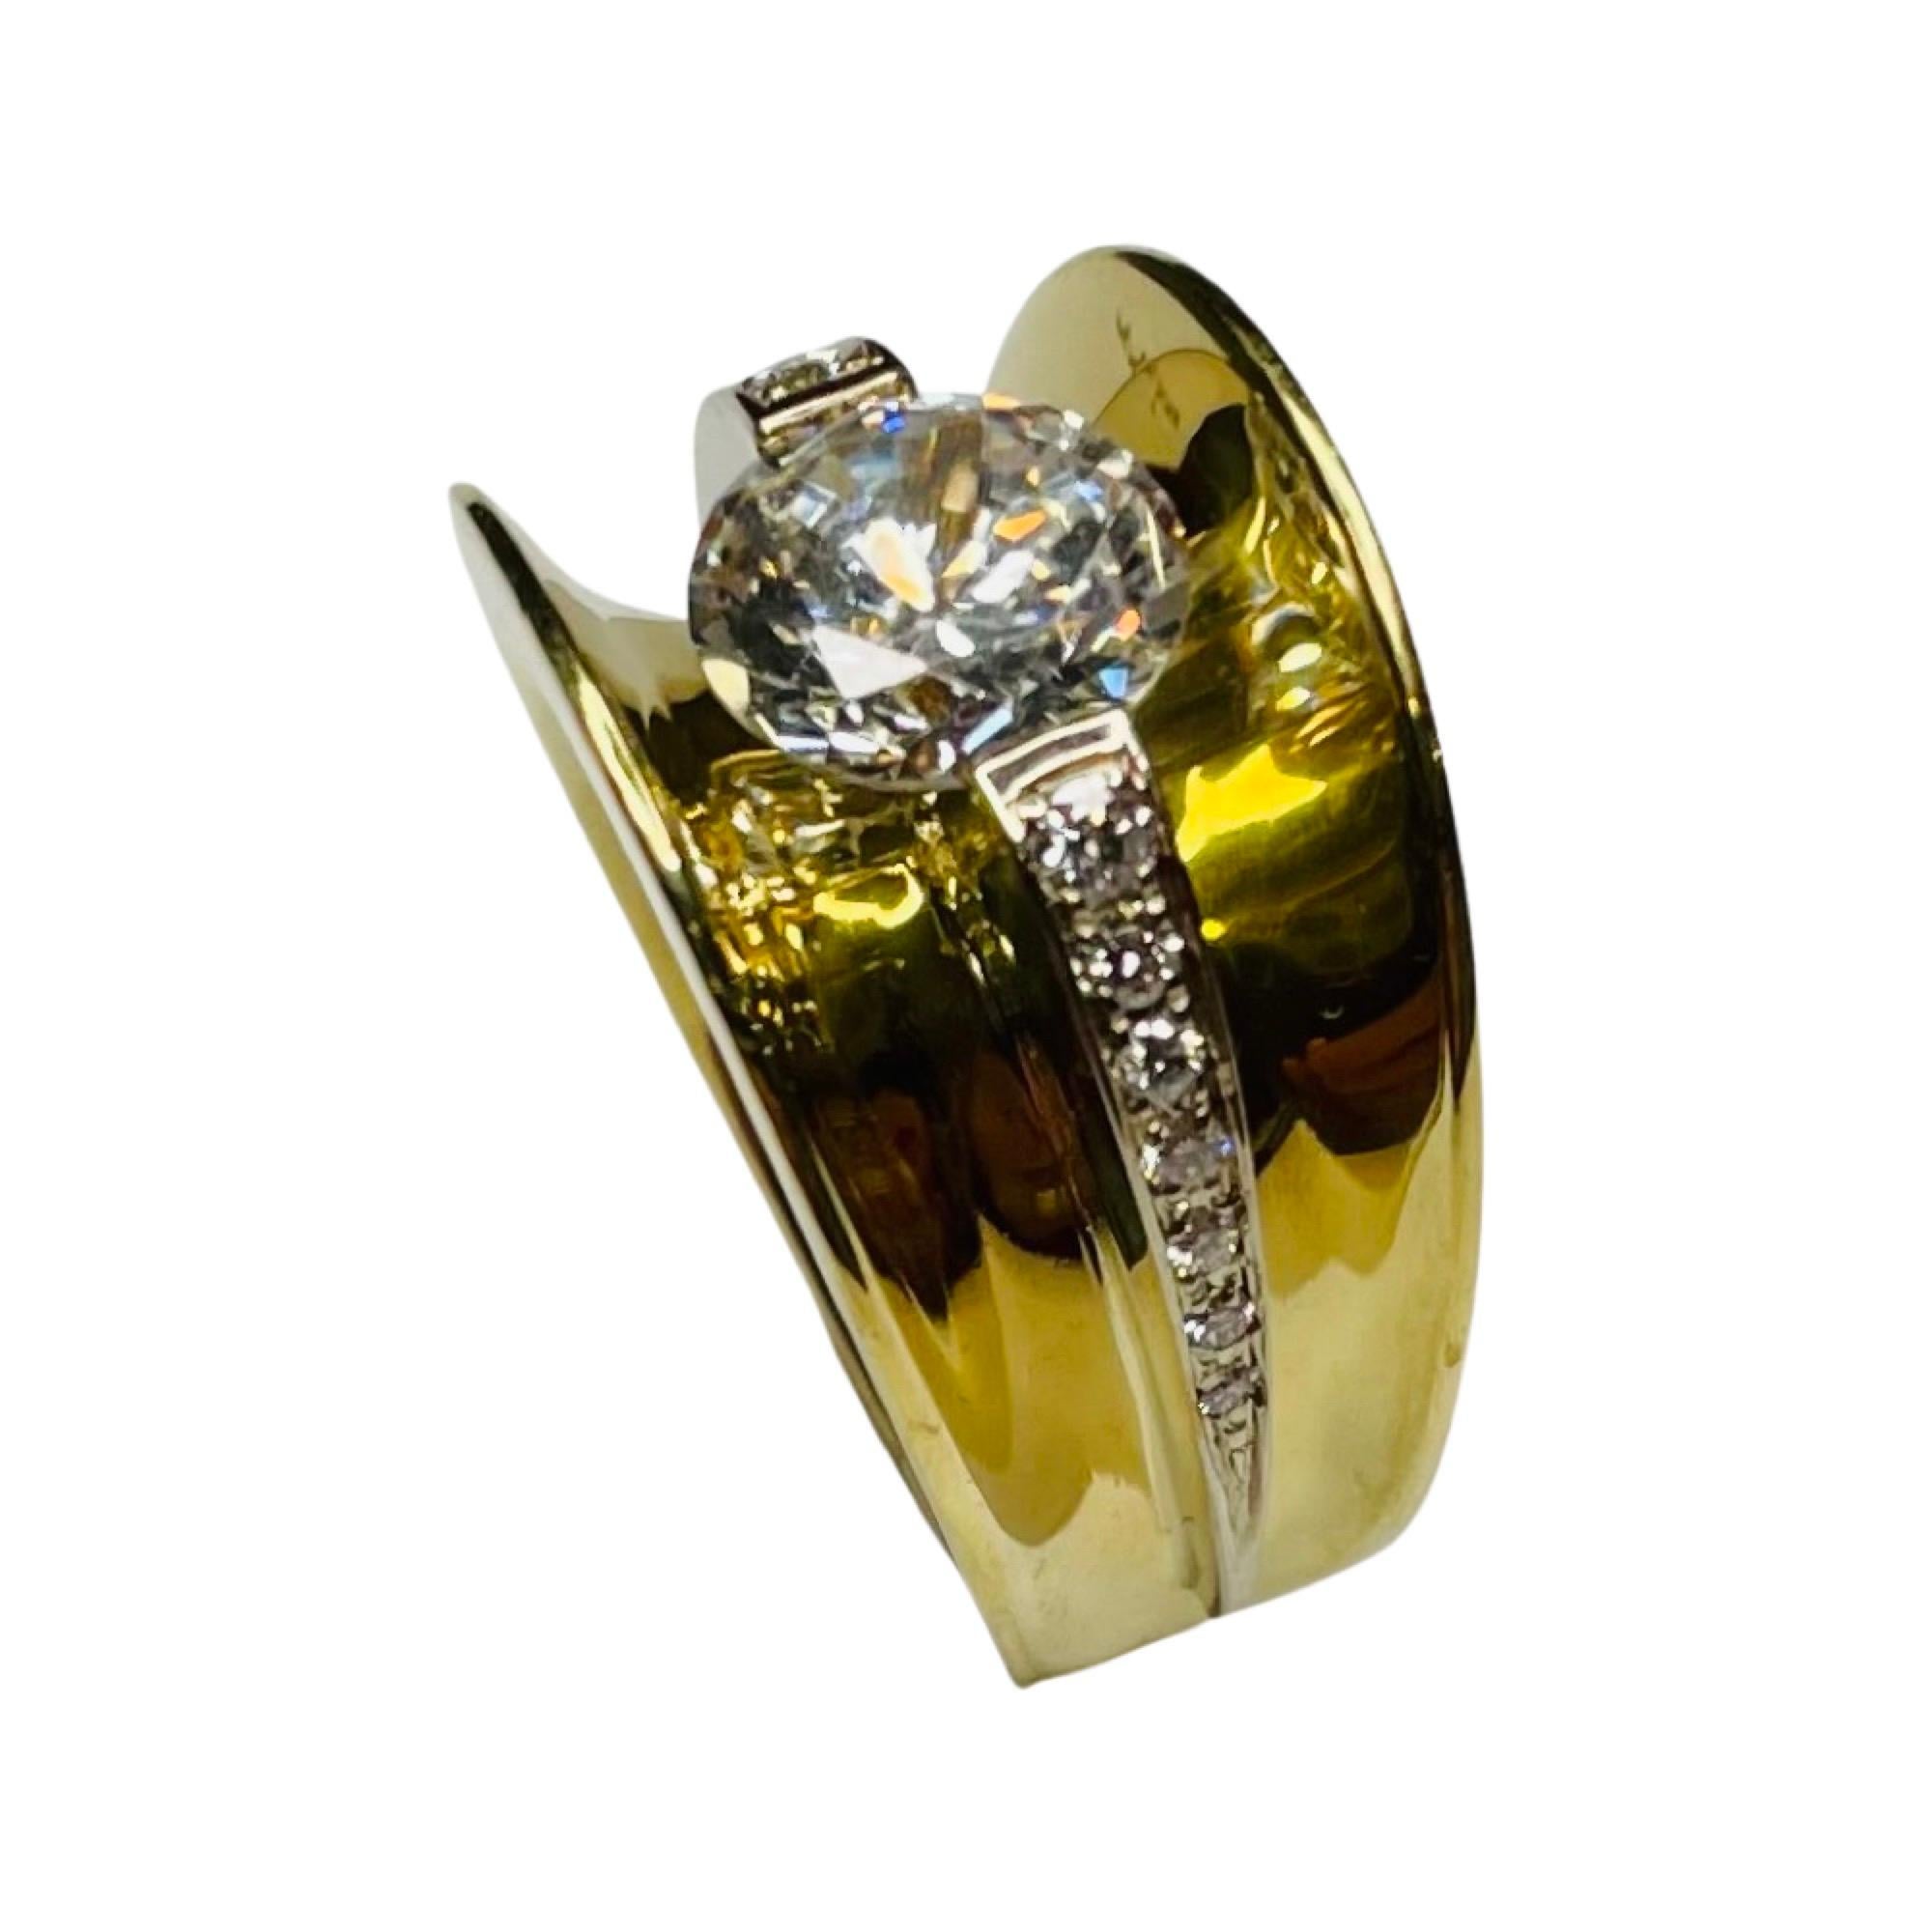 Eddie Sakamoto 18K Yellow and White Gold Diamond Ring. The center stone is a channel set Cubic Zirconia. It is 8.5 mm which is equivalent to a 2.5 carat diamond. It can be replaced with a colored stone, moissonite or natural or synthetic diamond for